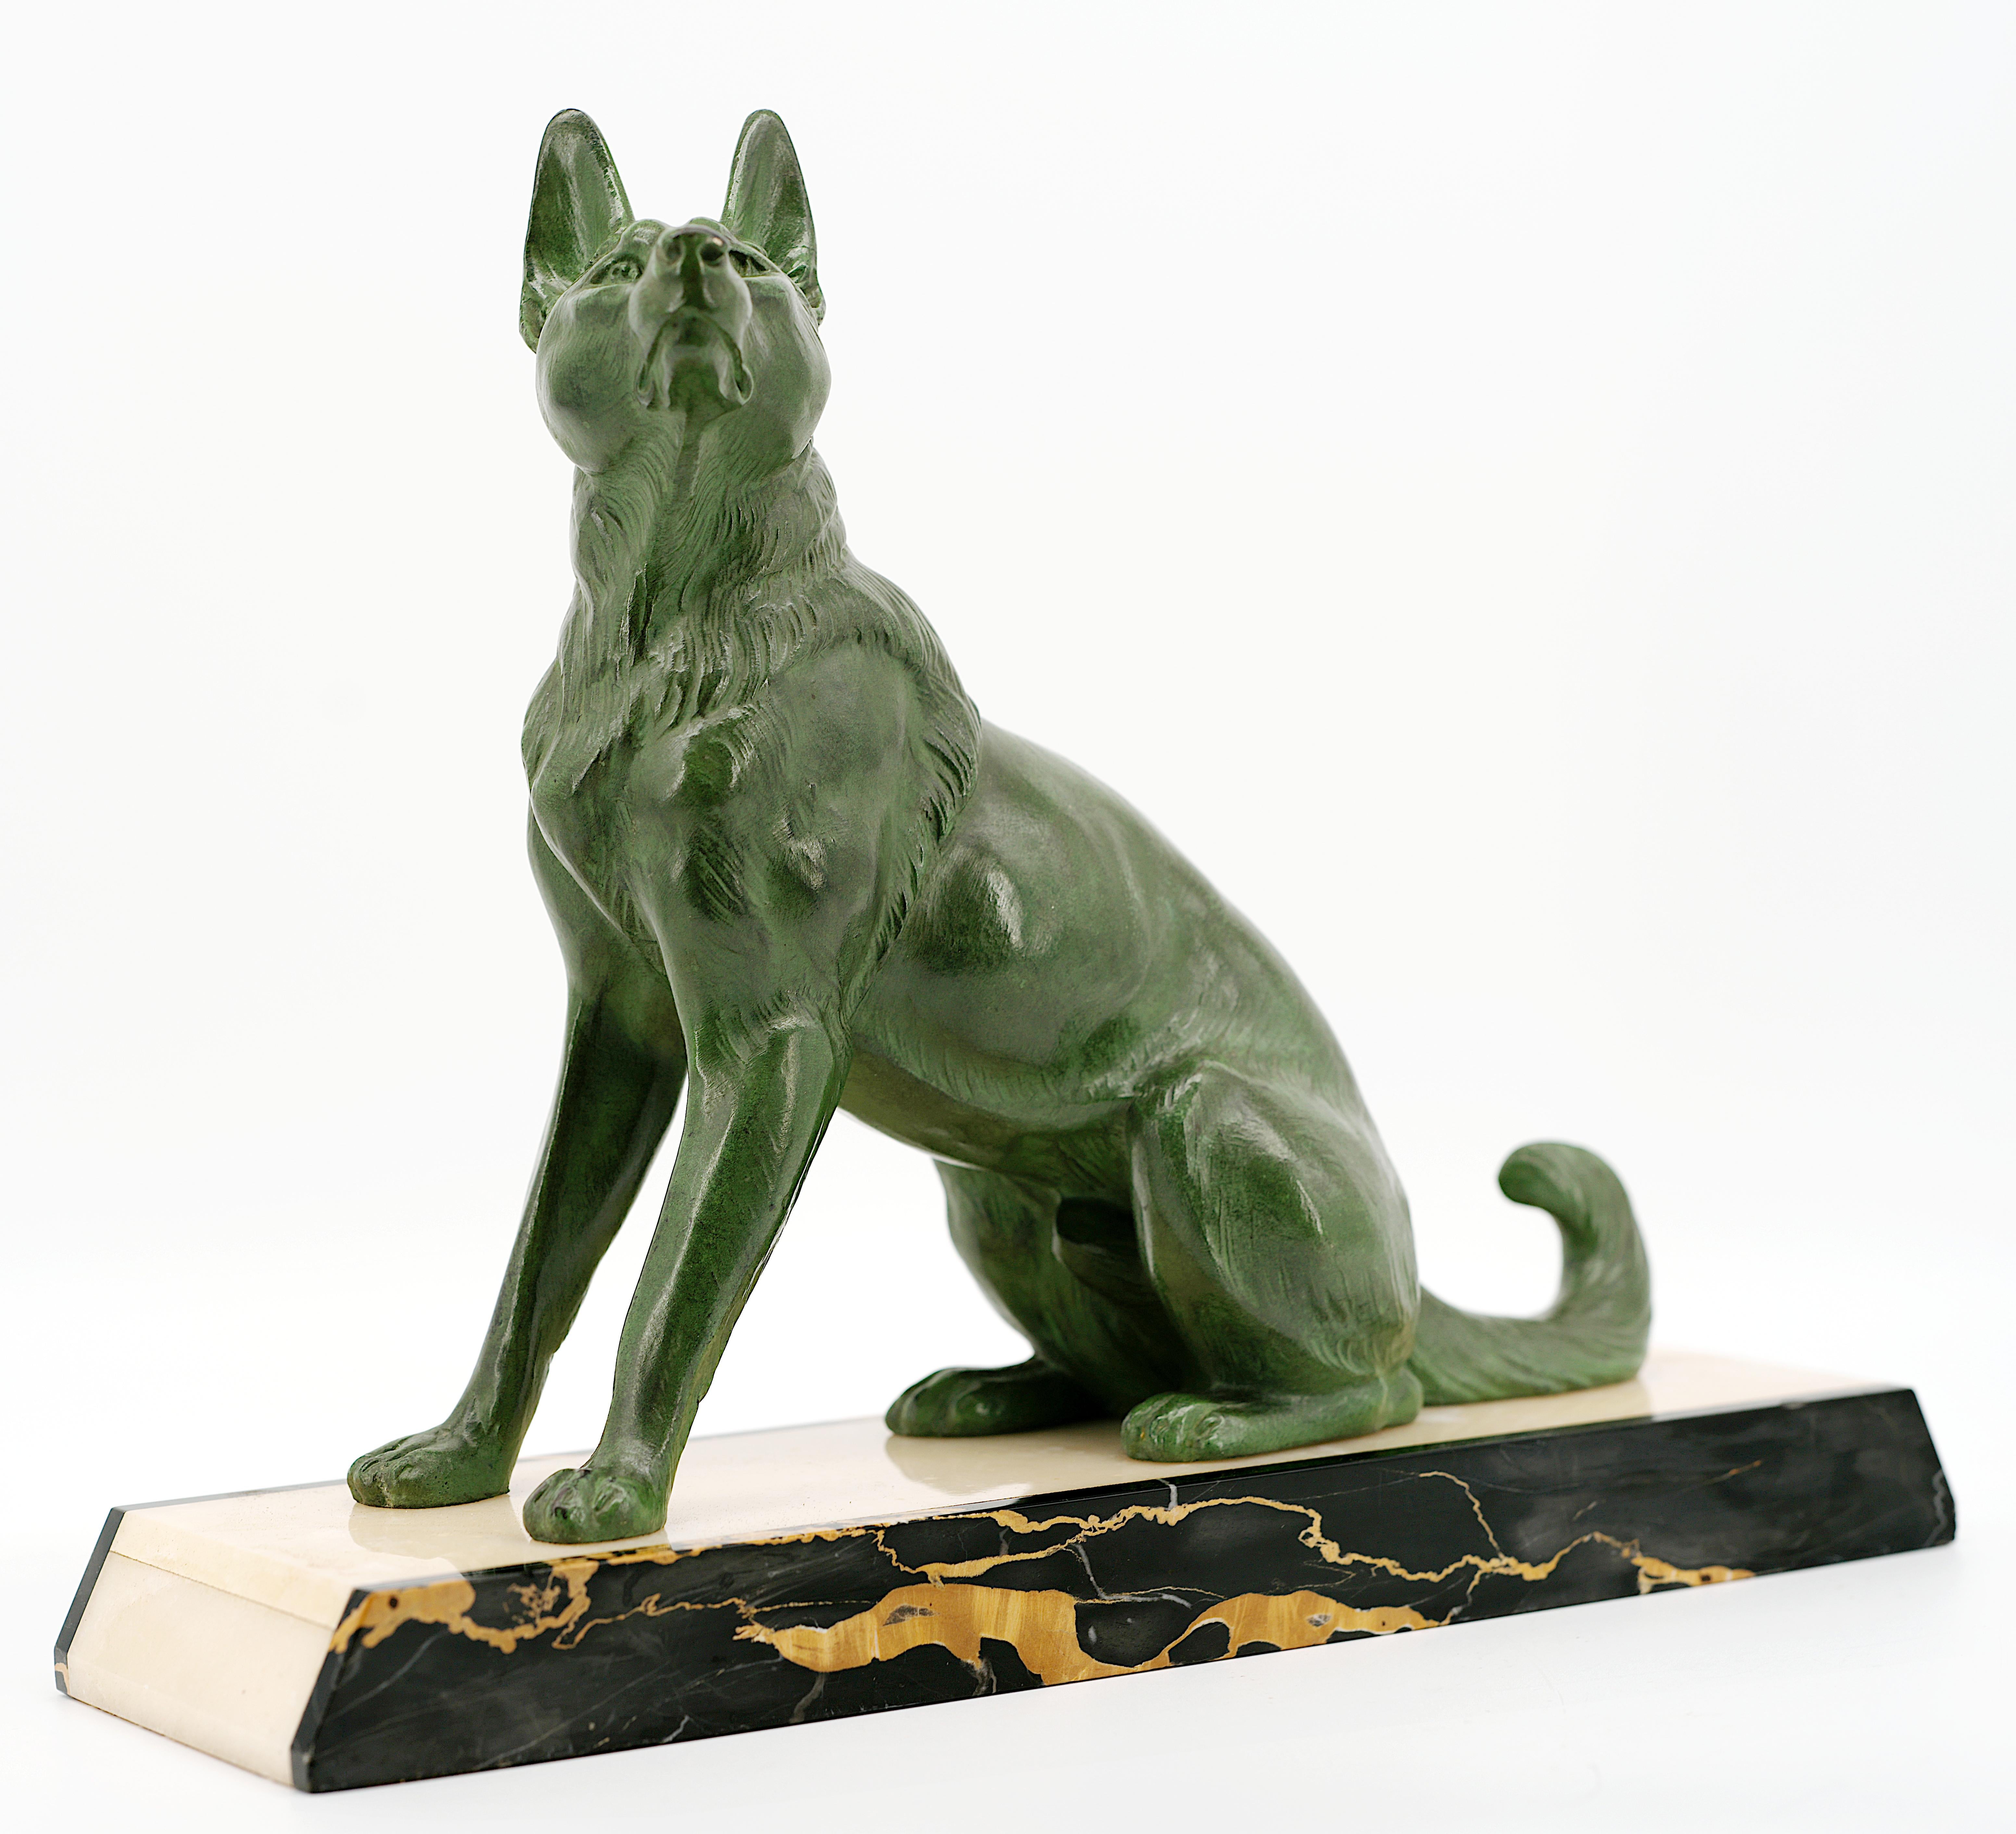 German shepherd sculpture by Louis-Albert CARVIN, France, ca.1930. Spelter, marble and onyx. Spelter dog. Marble and onyx base. Height: 12.8